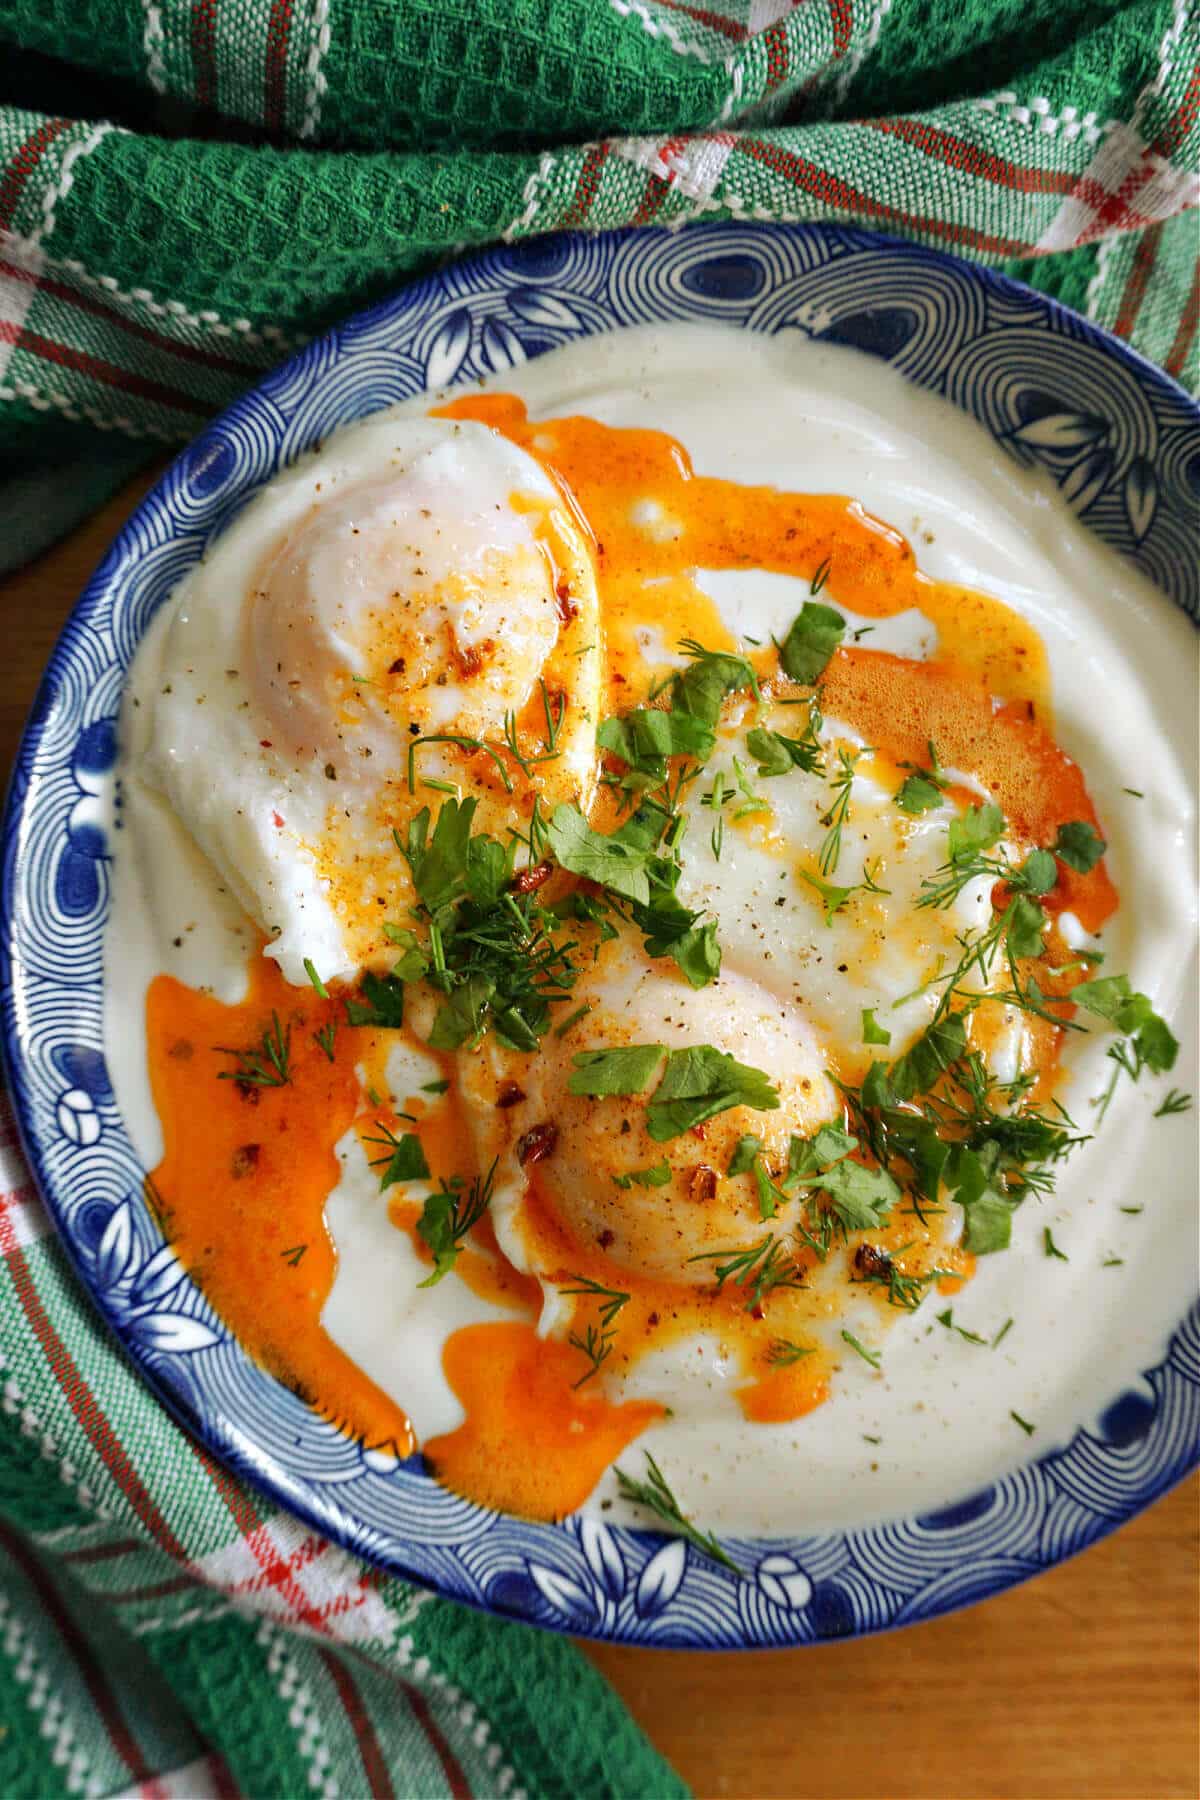 A blue plate with poached egg on a bed of yogurt, spicy sauce and chopped herbs on top.